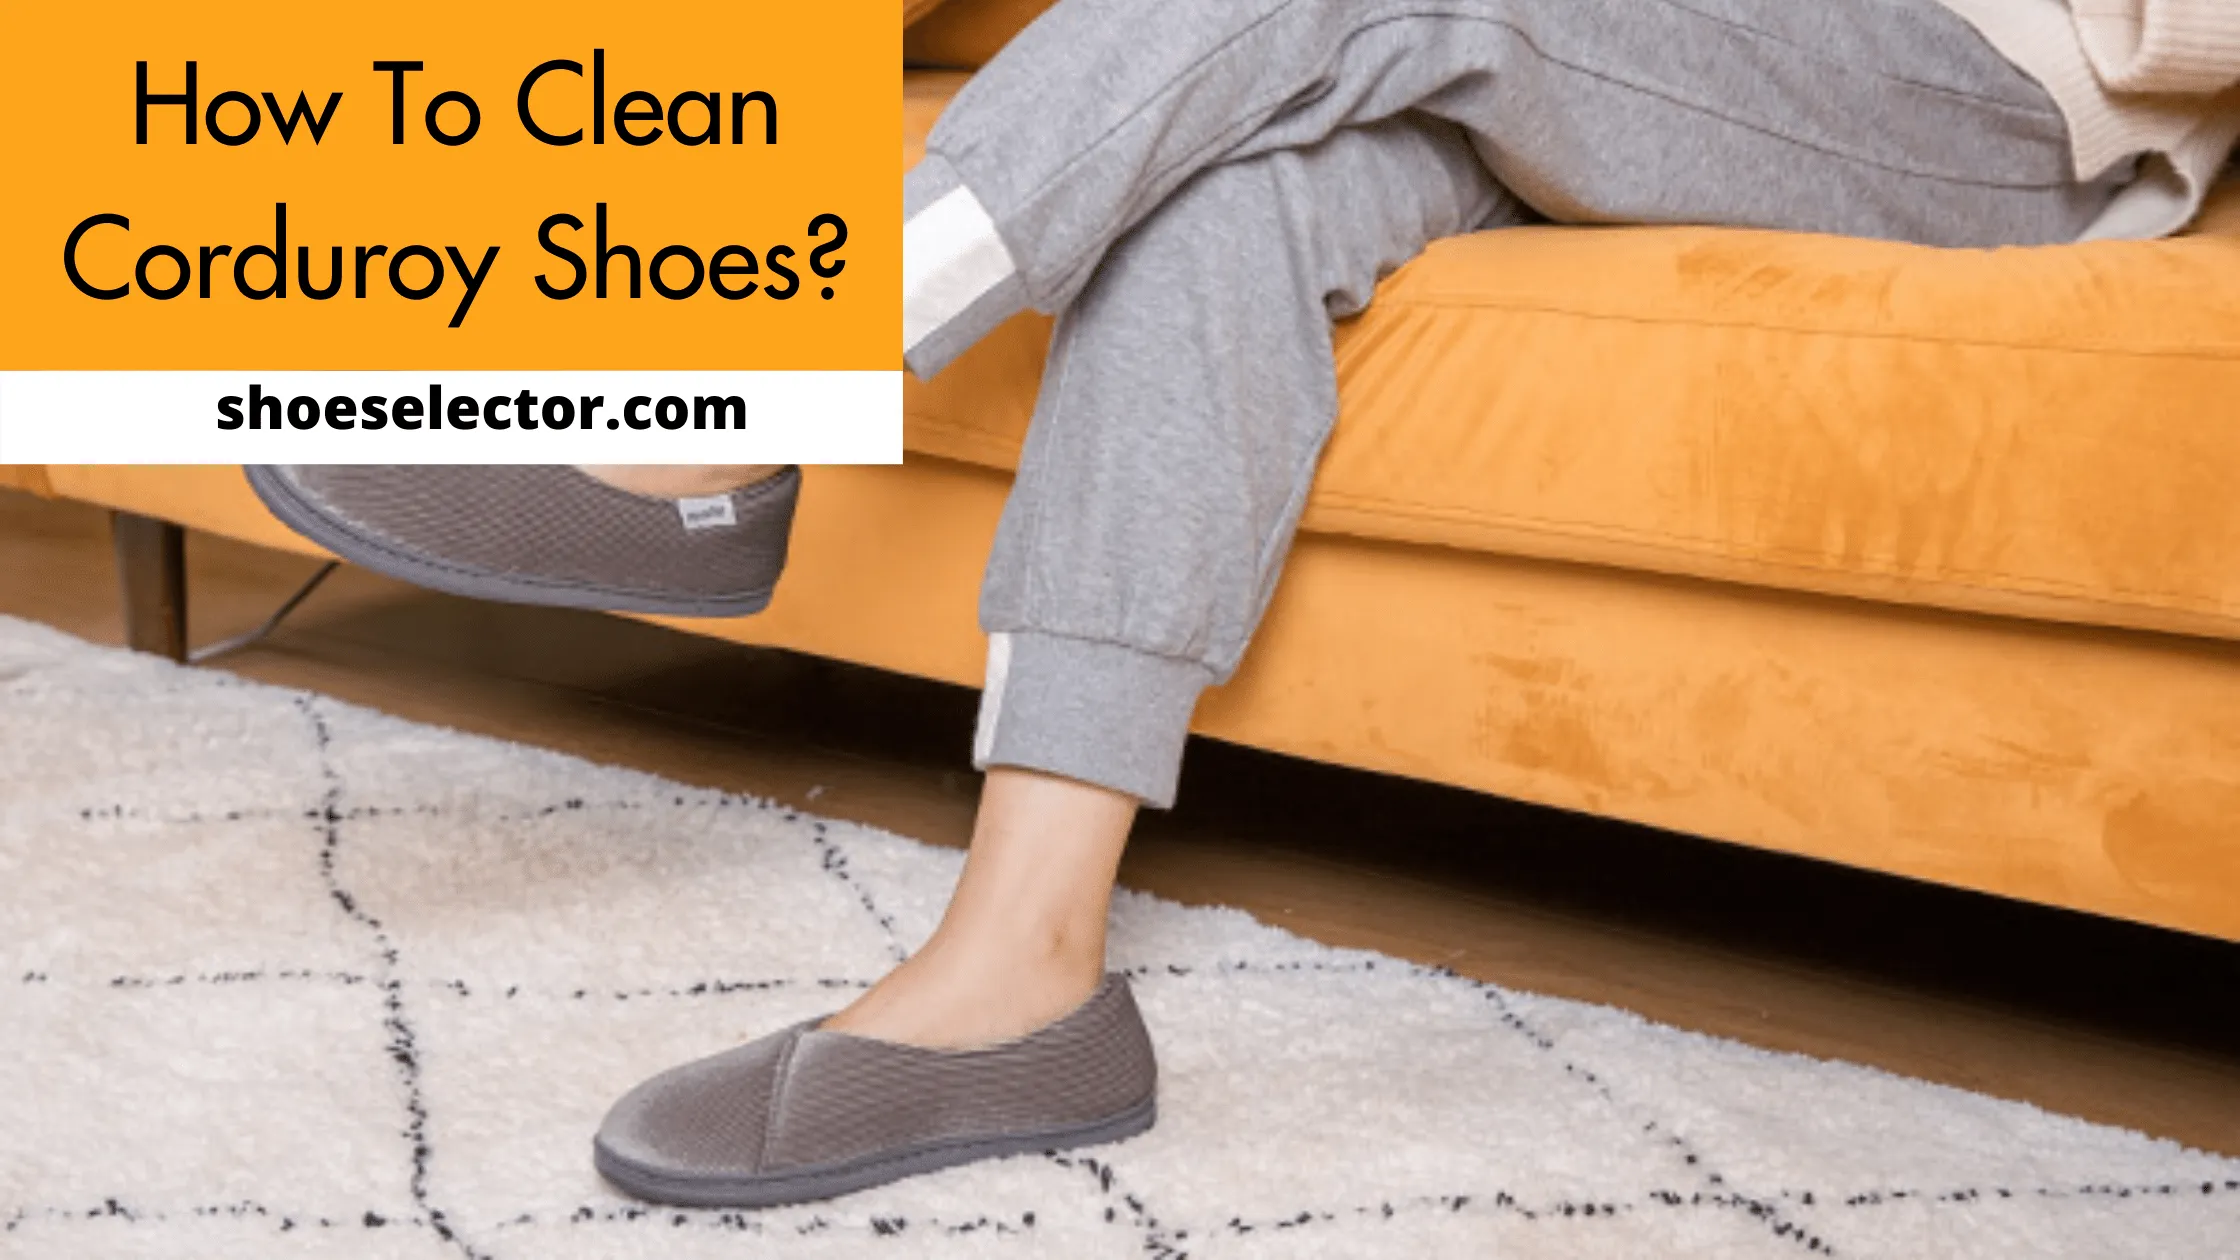 How To Clean Corduroy Shoes? - Solution Guide